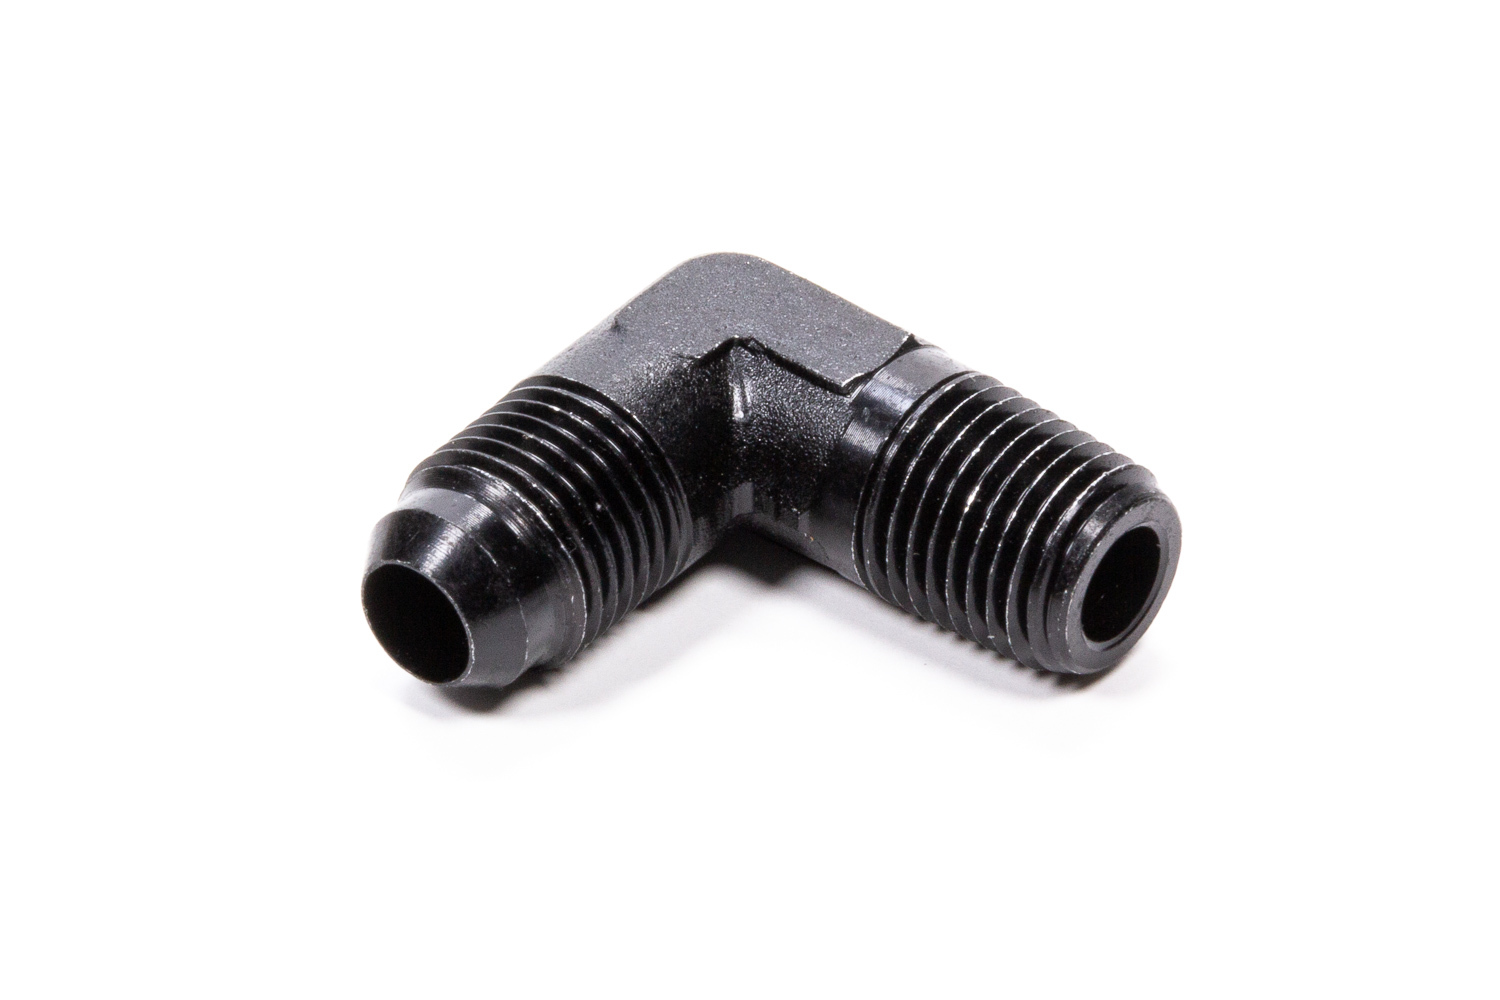 Fragola 482204-BL Fitting, Adapter, 90 Degree, 4 AN Male to 1/8 in NPT Male, Aluminum, Black Anodized, Each